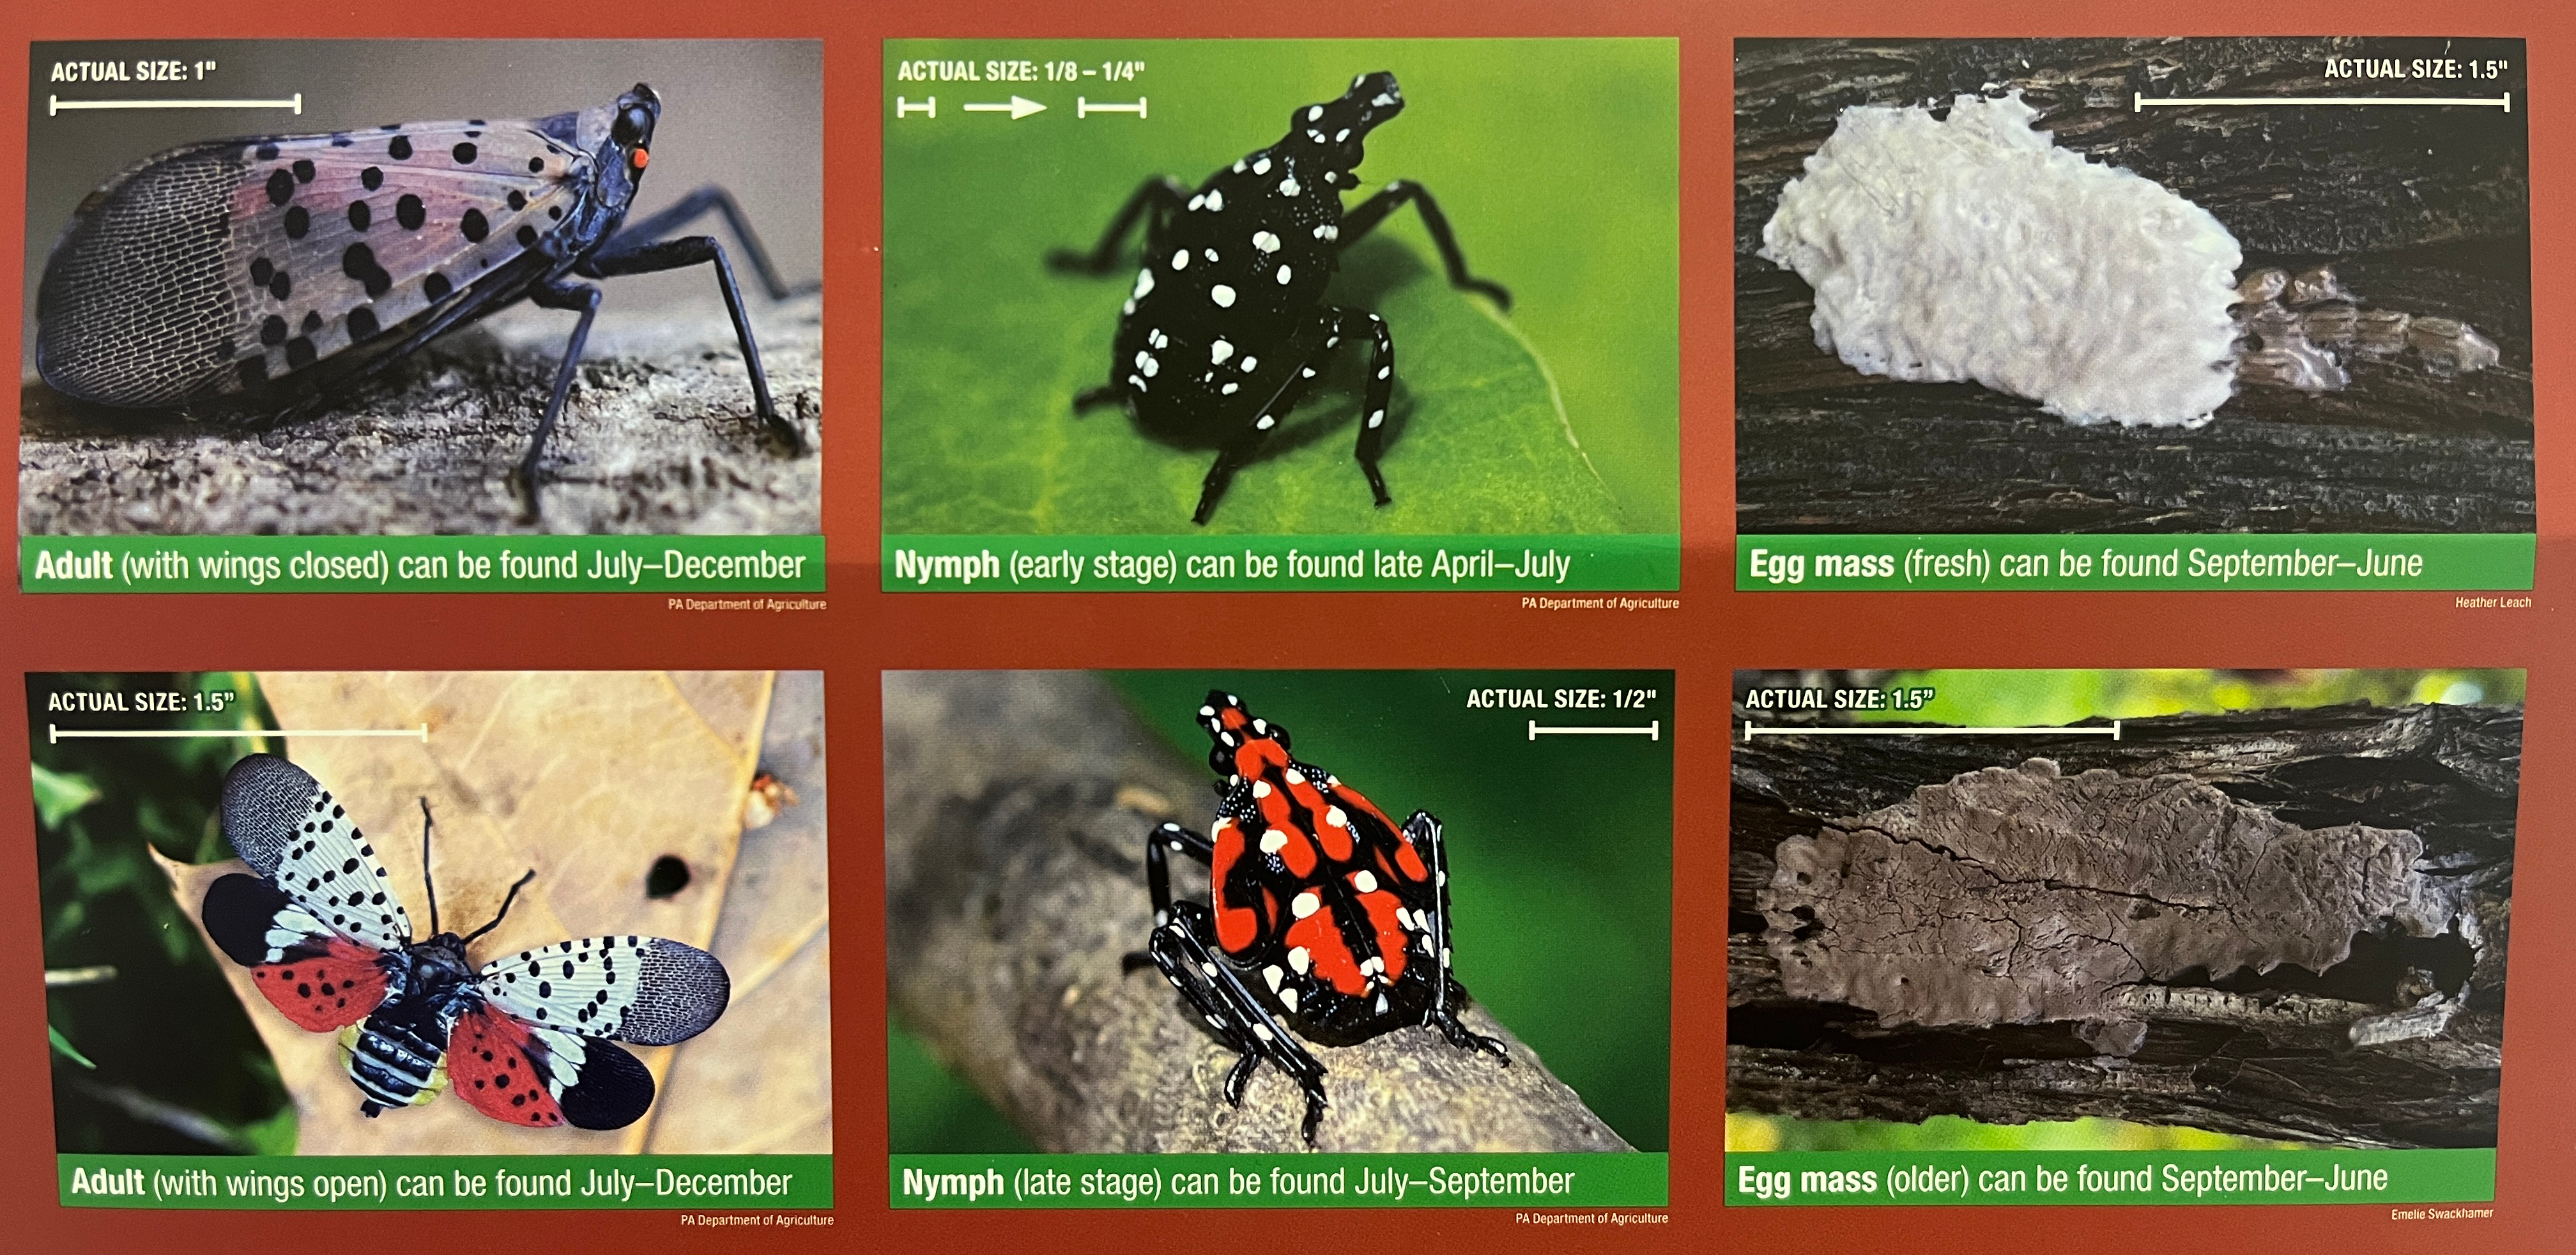 Six images show closeups of a bug in various life stages, one black with white spots, one black and red with white spots, one with wings, and closeups of egg sacs